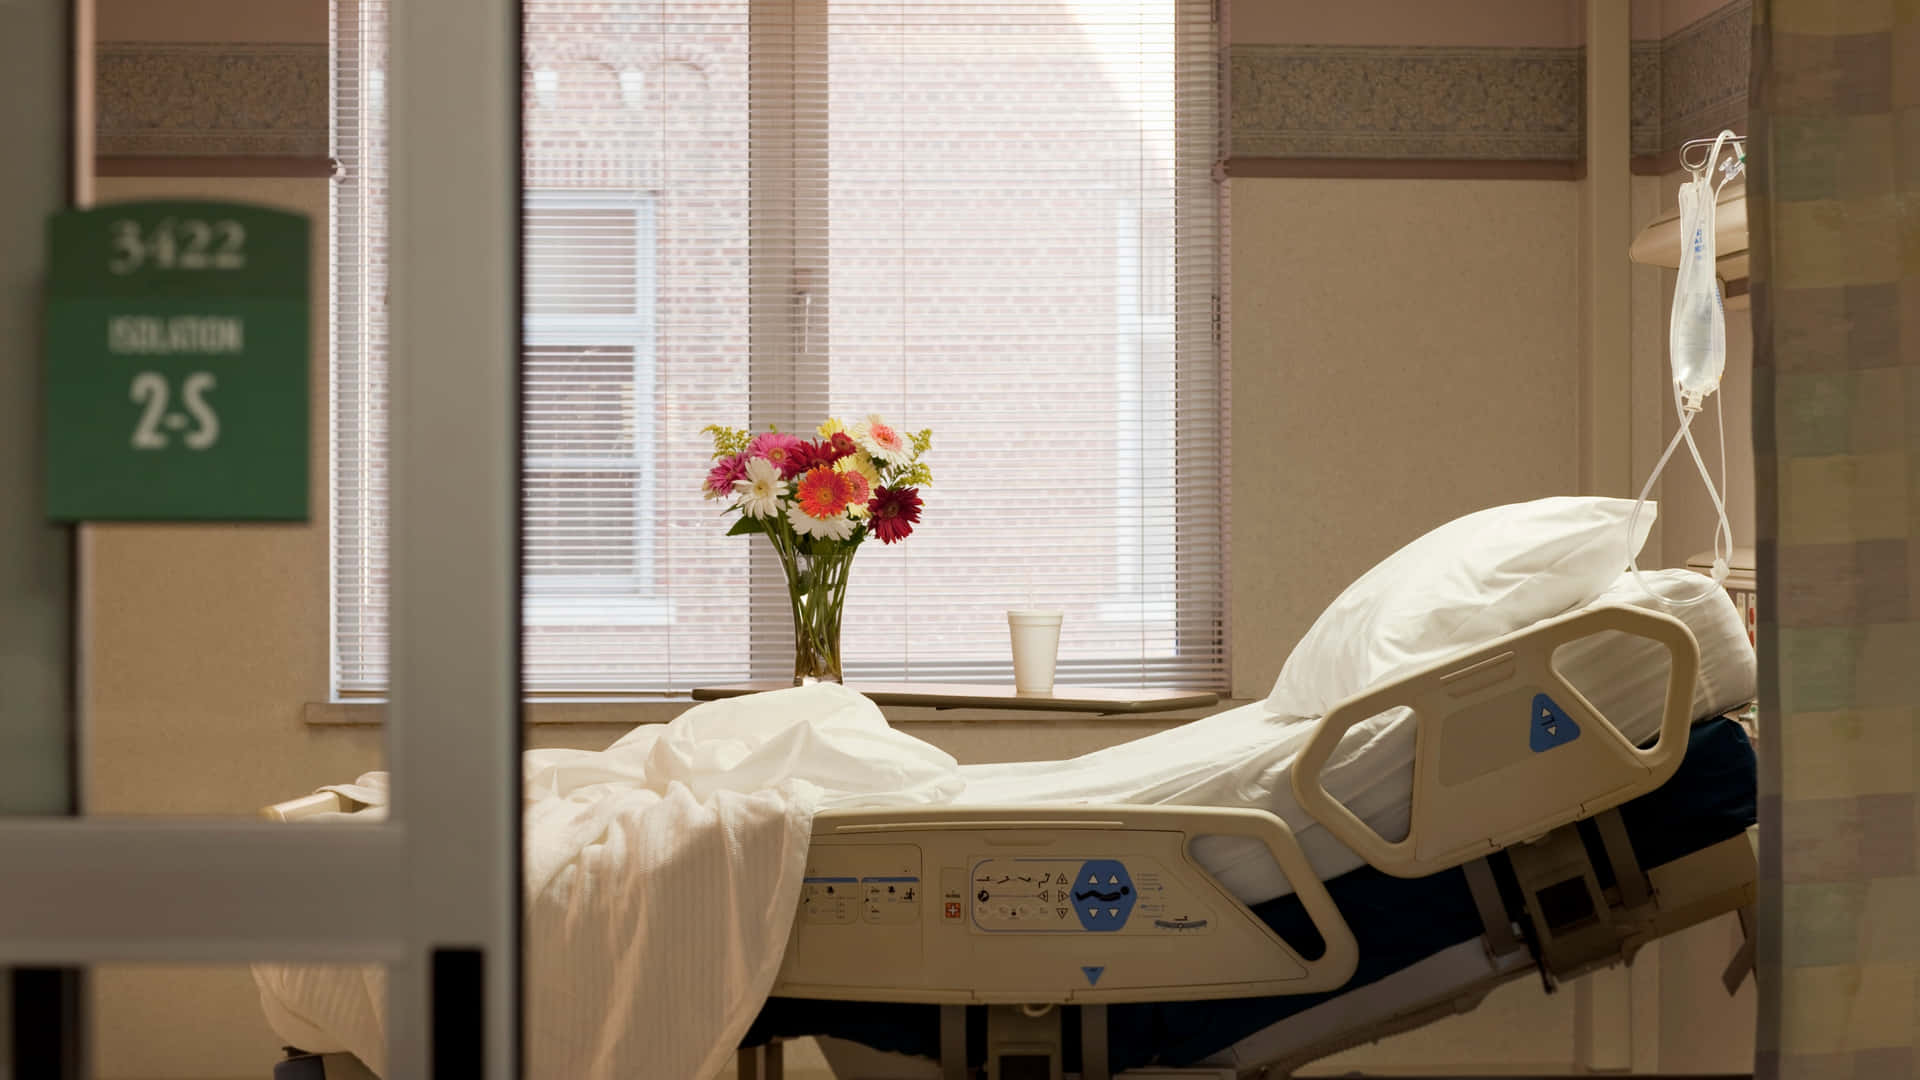 A serene hospital room featuring a clean hospital bed and a flower vase by the bedside. Wallpaper